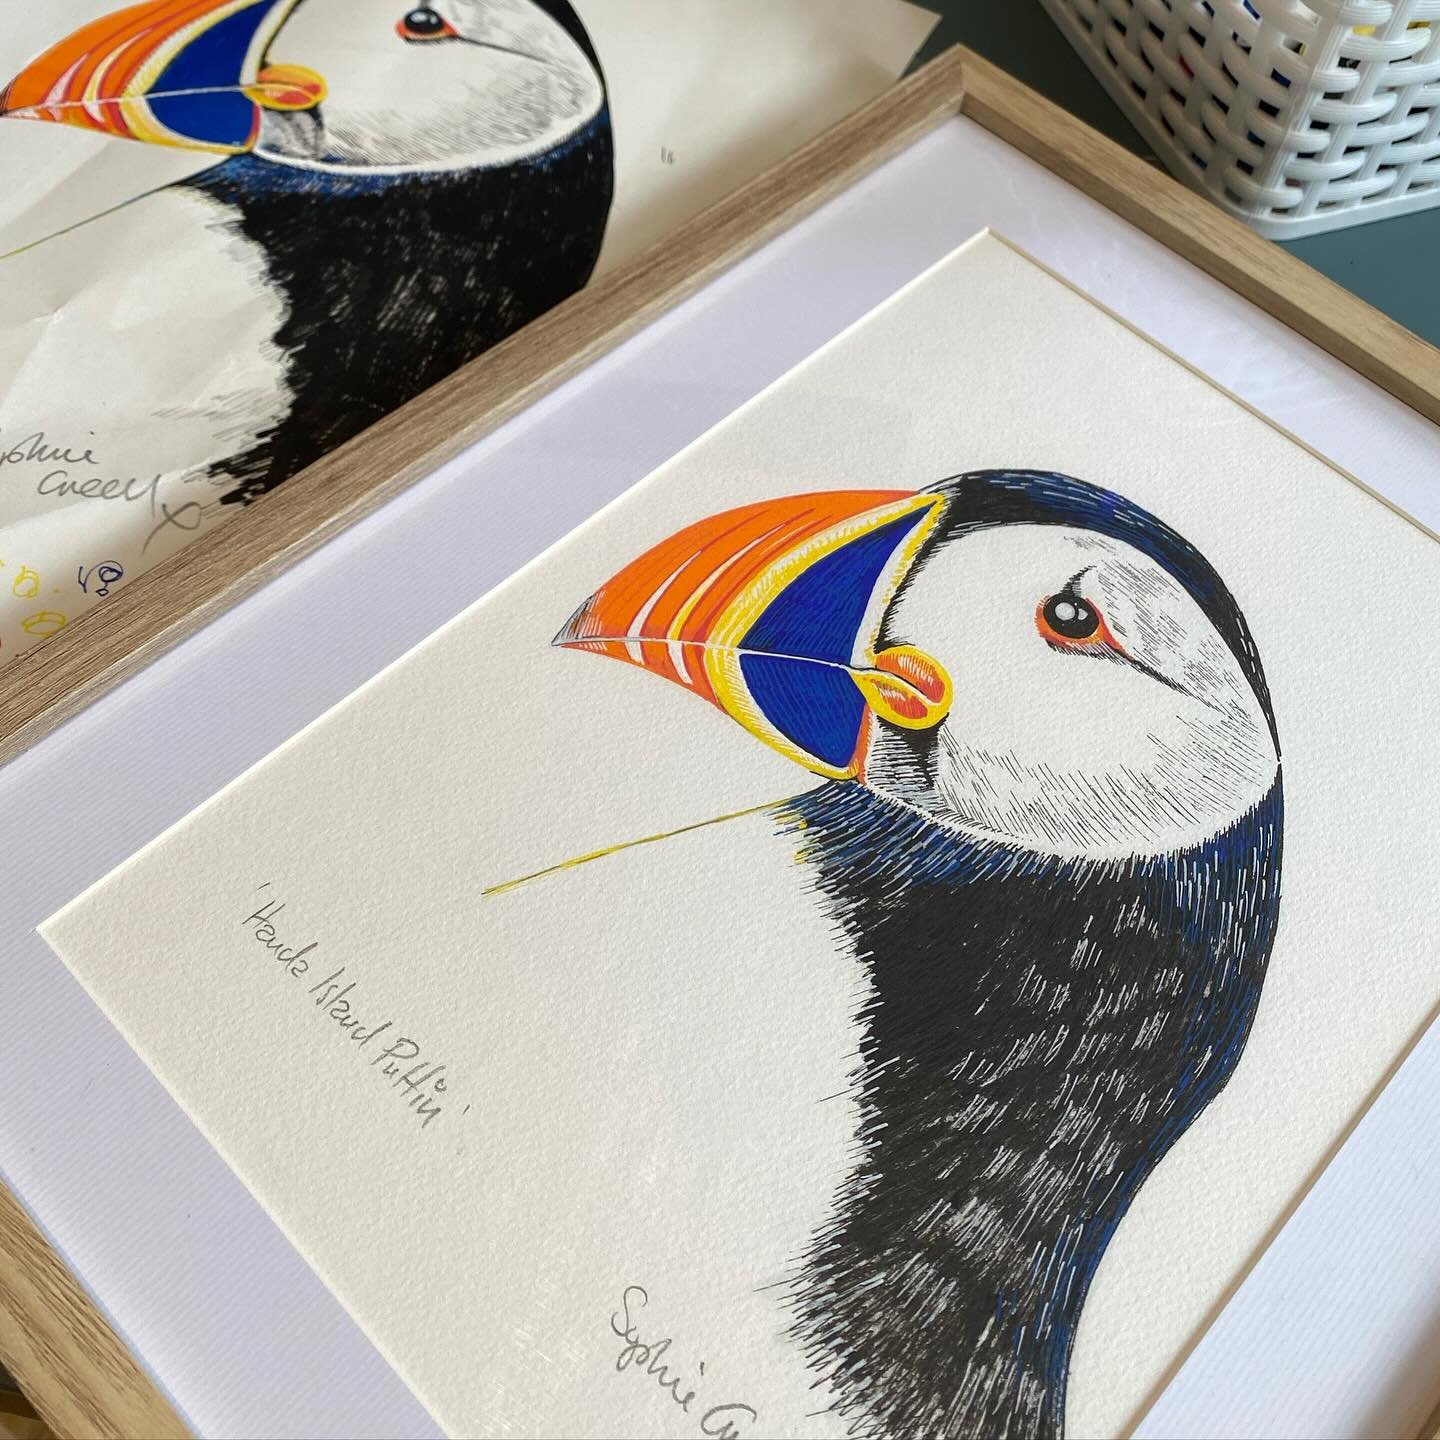 A Puffins appreciation post!

So last month a customer bought an original puffin illustration from my website and I quickly realised it had been damaged in storage. Not wanting to let the customer down (and because I like drawing puffins) I offered t